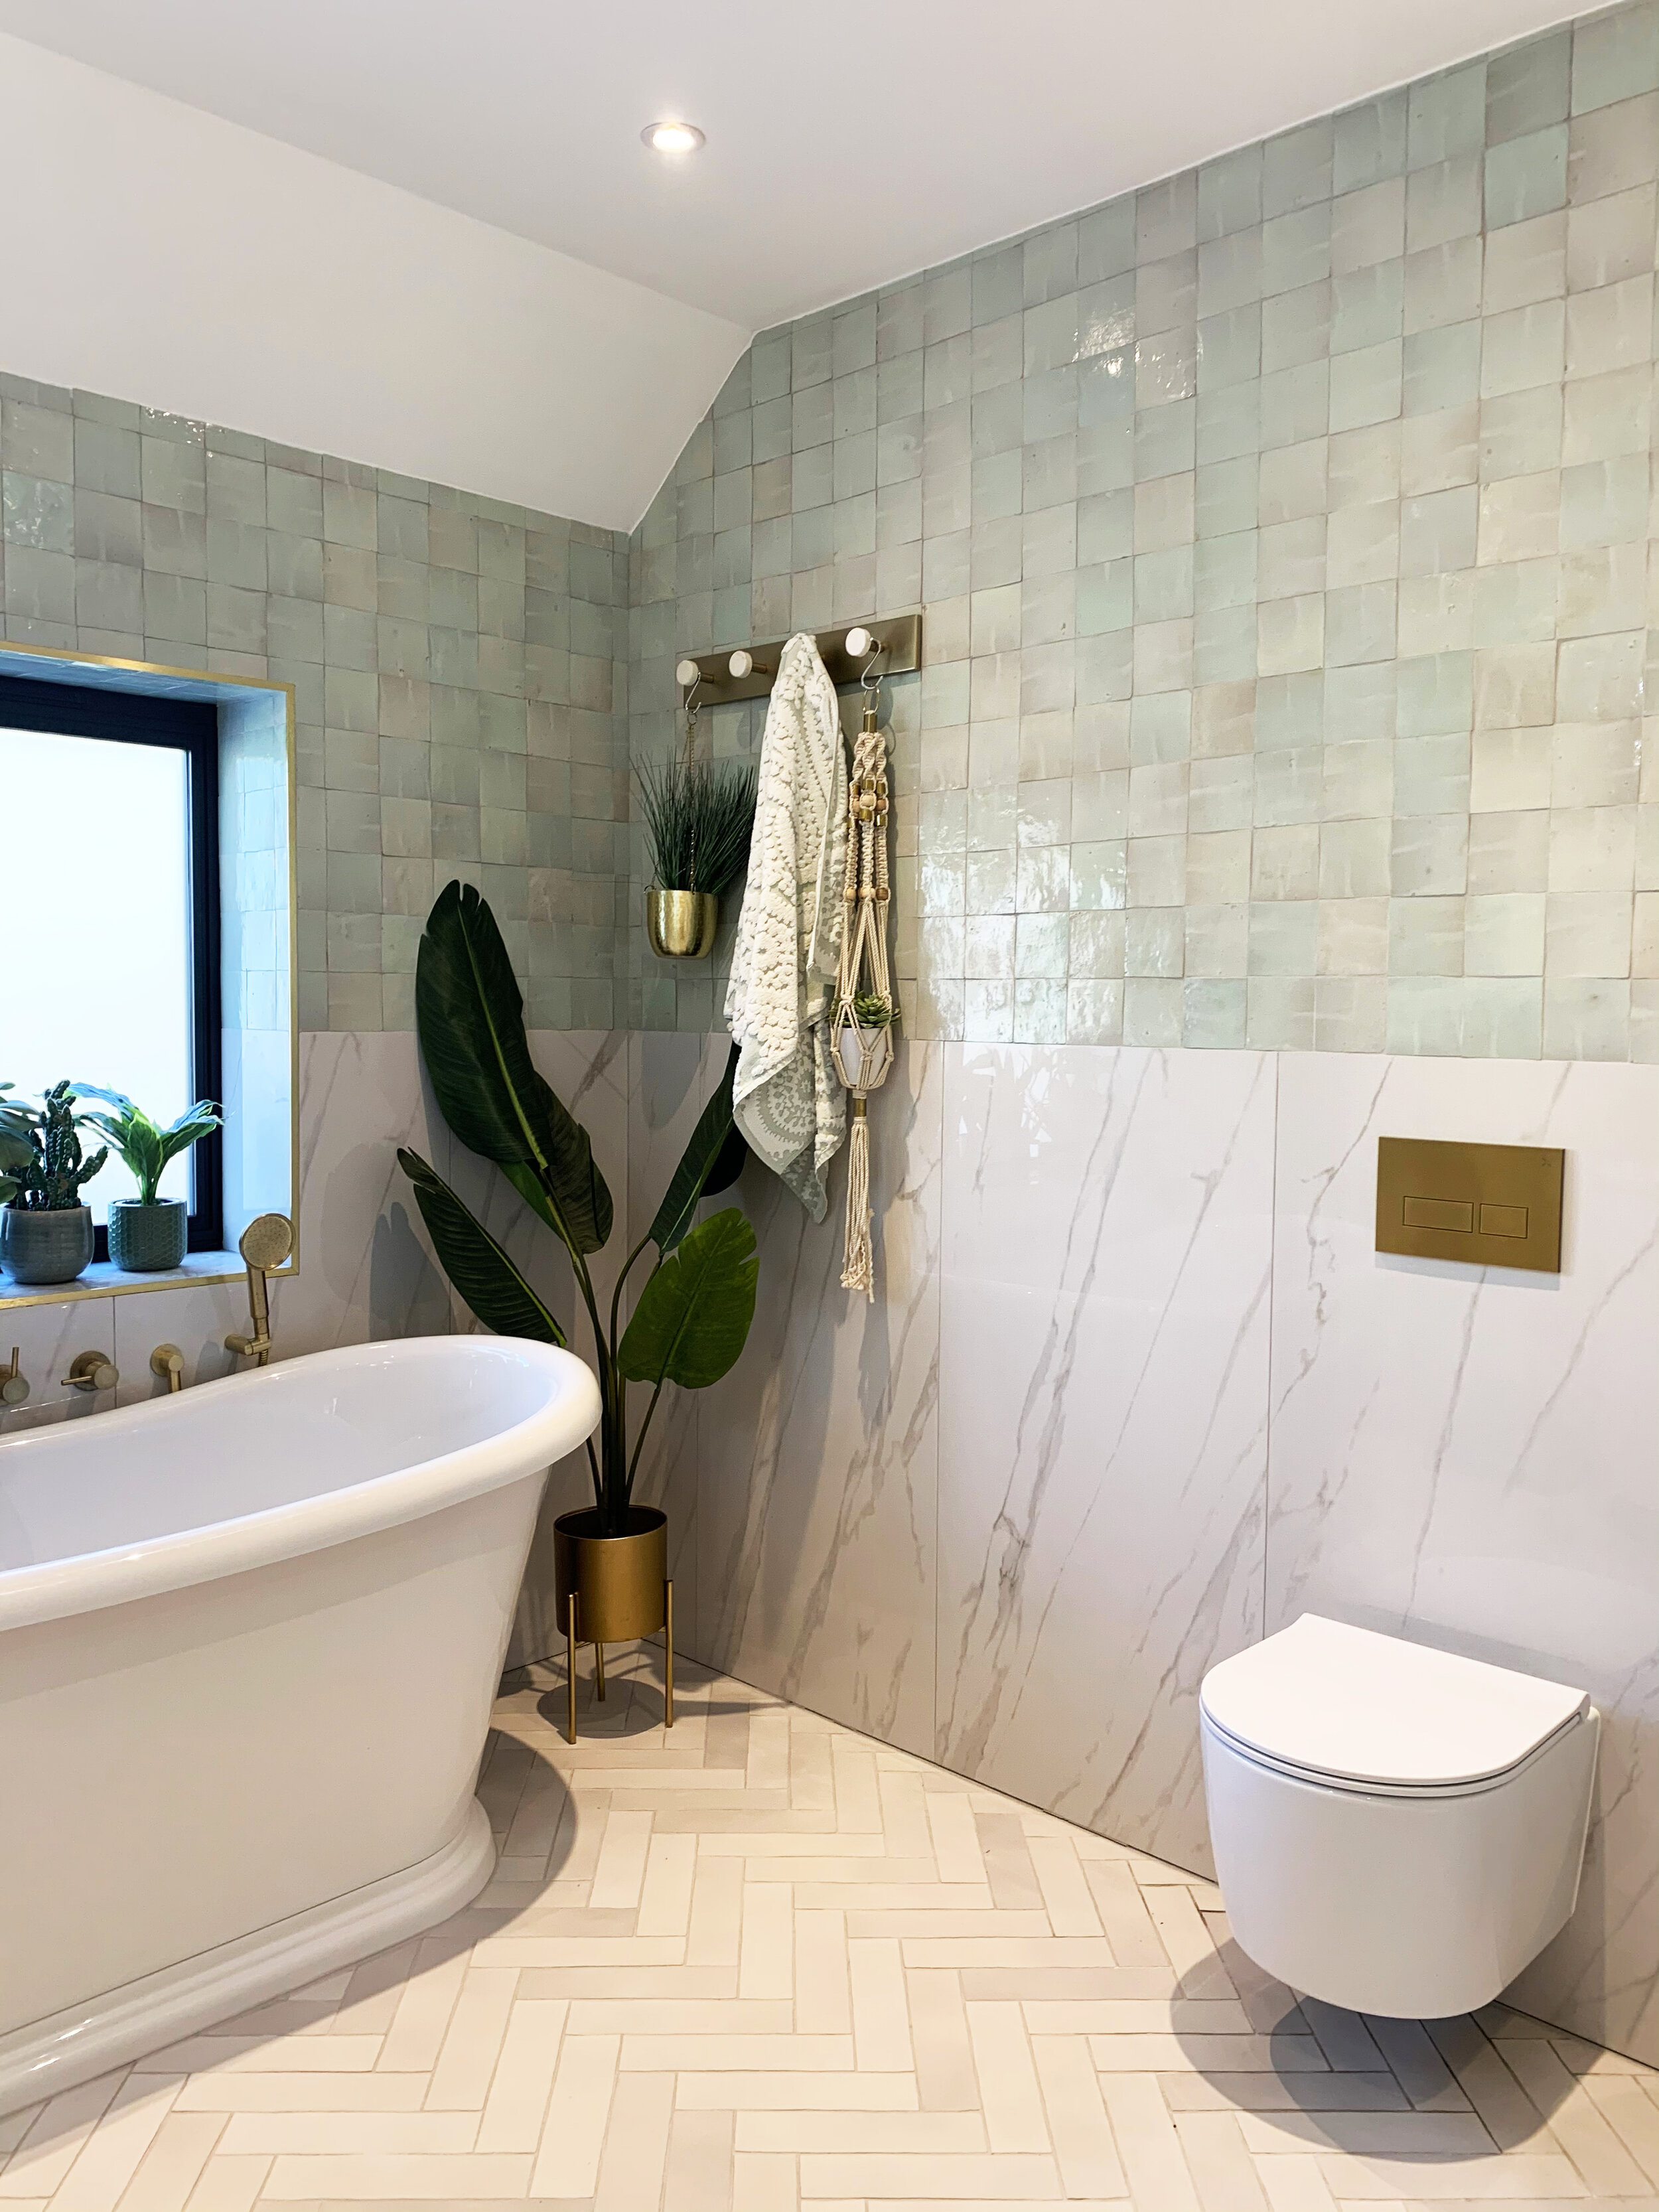 Uitwerpselen salade afwijzing HOW TO CREATE A RELAXING SPA INSPIRED BATHROOM AT HOME — HOUSE LUST